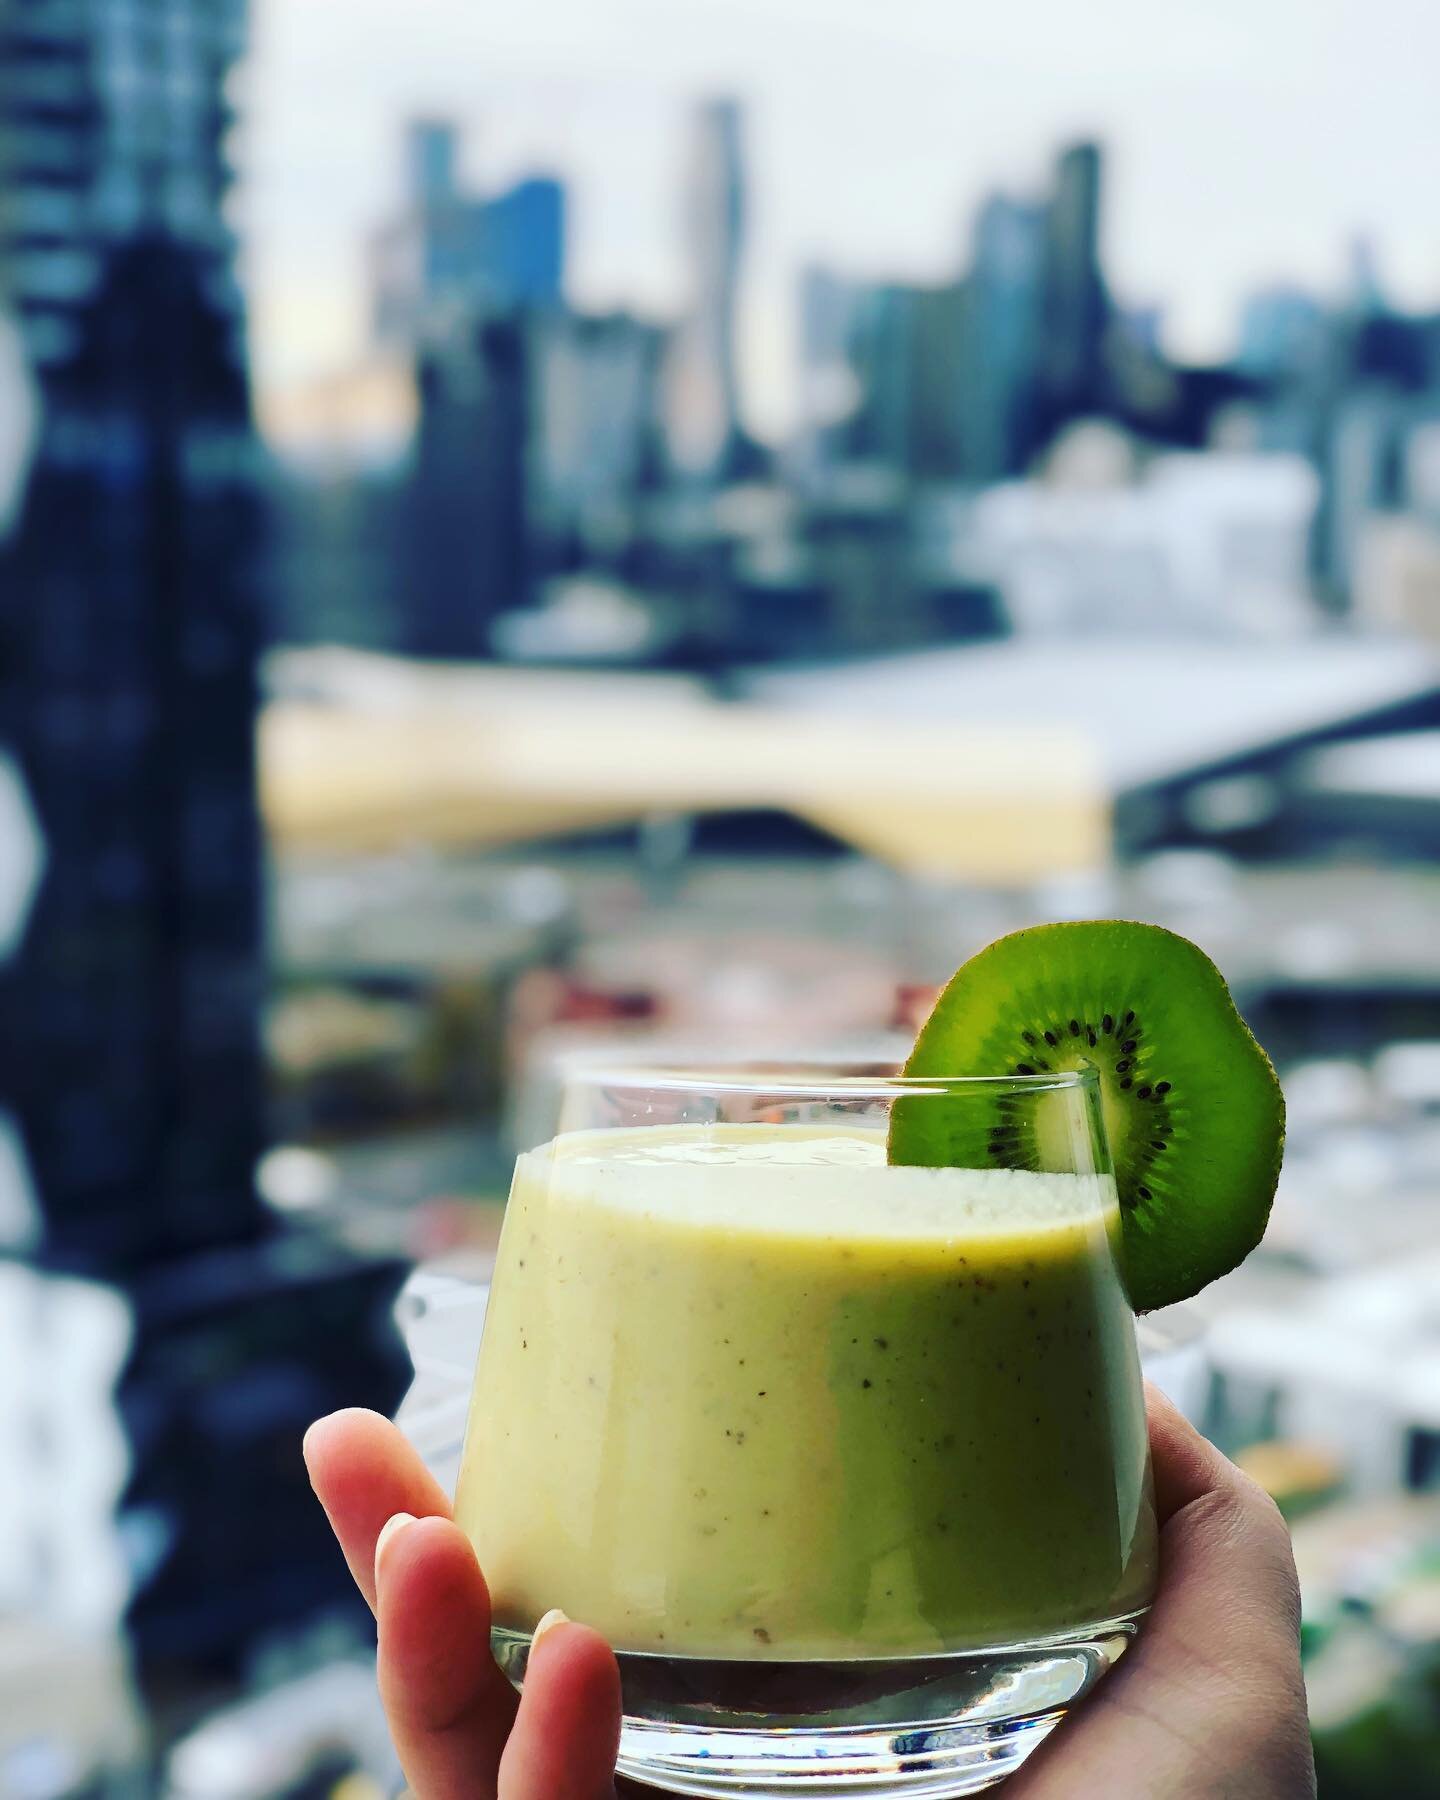 &lsquo;Make-your-poo-absolutely-excellent&rsquo; smoothies coming your way! 

We tested our favourite smoothies for improving fibre and relieving constipation today! 

YUM! Can anyone guess the secret ingredient? 

What is your go to constipation rel